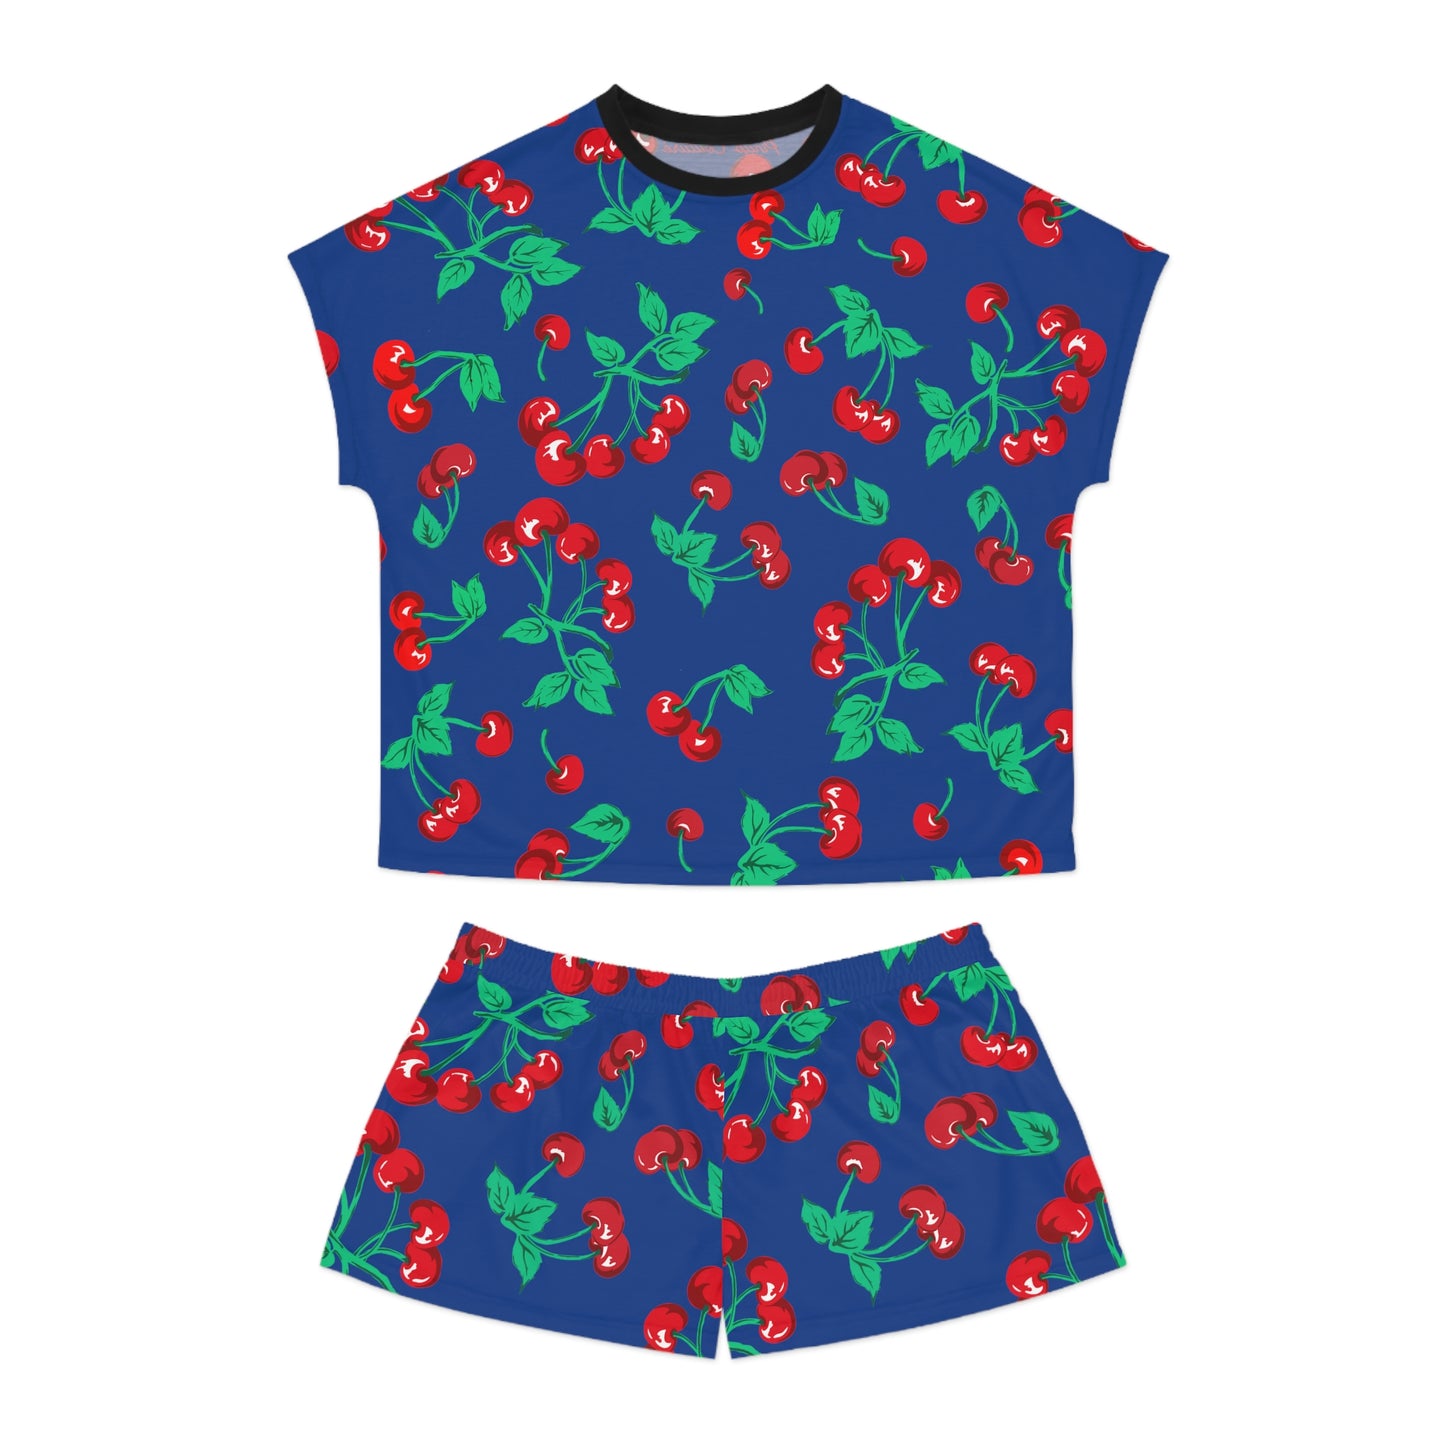 TGIF Sleepover PJs in Dark Blue Cherry Girl Tee & Pajama Shorts-Set | Pinup Couture Relaxed